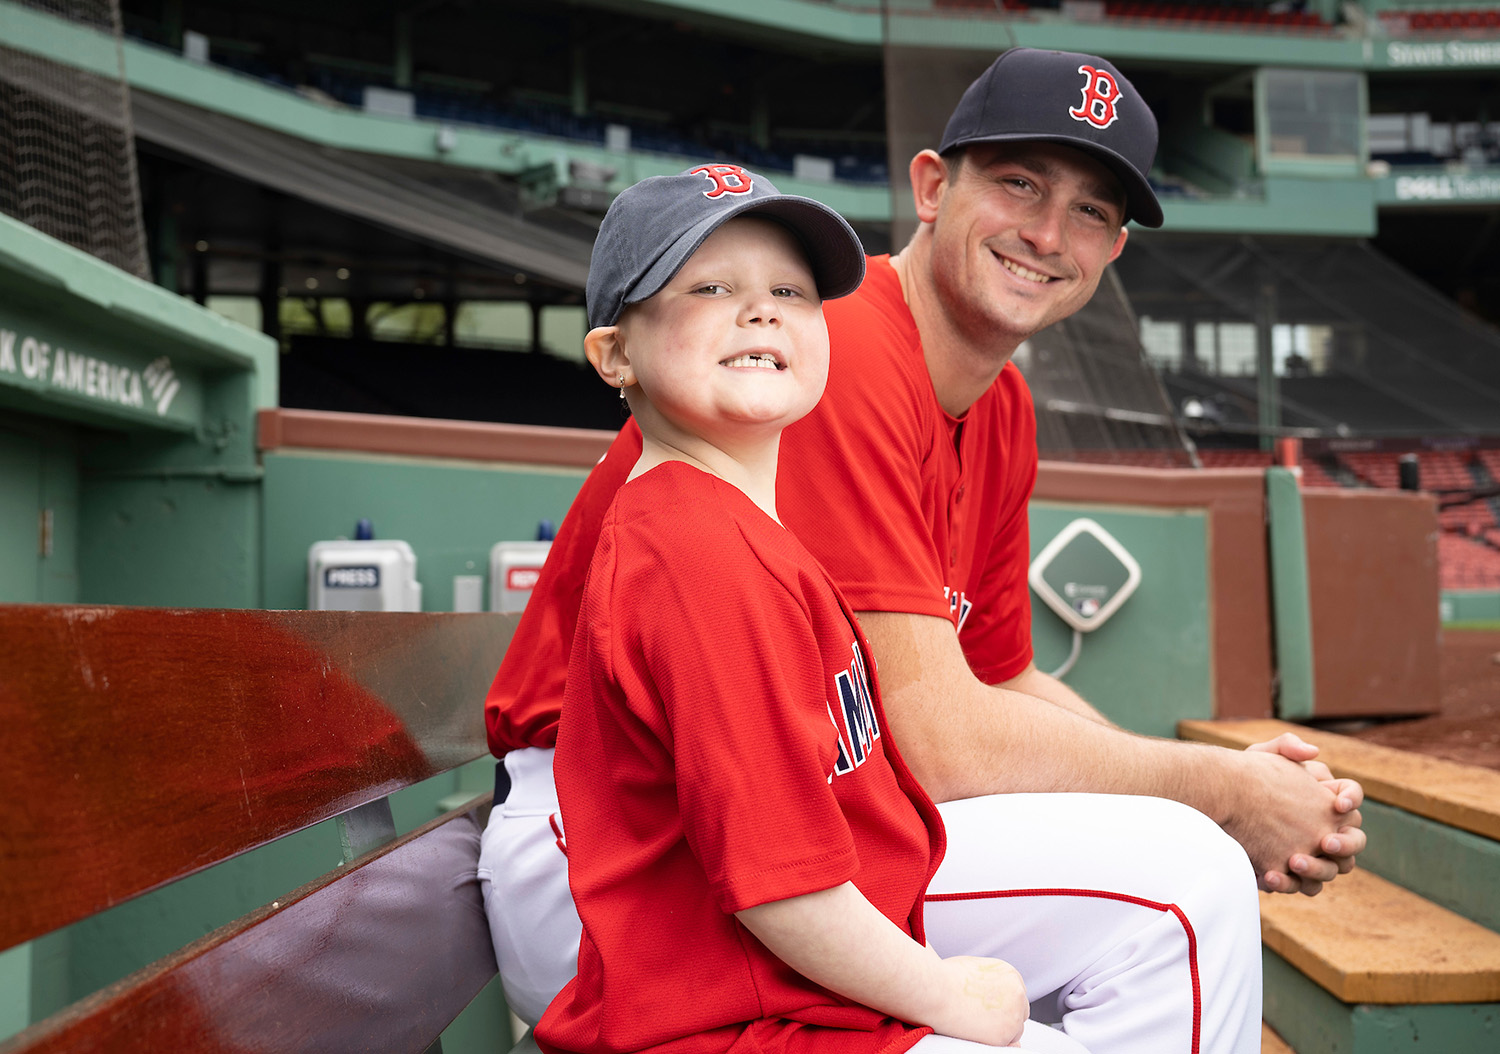 Dana-Farber Jimmy Fund Clinic patient Lily sits in the dugout with Red Sox pitcher Garrett Whitlock at Fenway Park